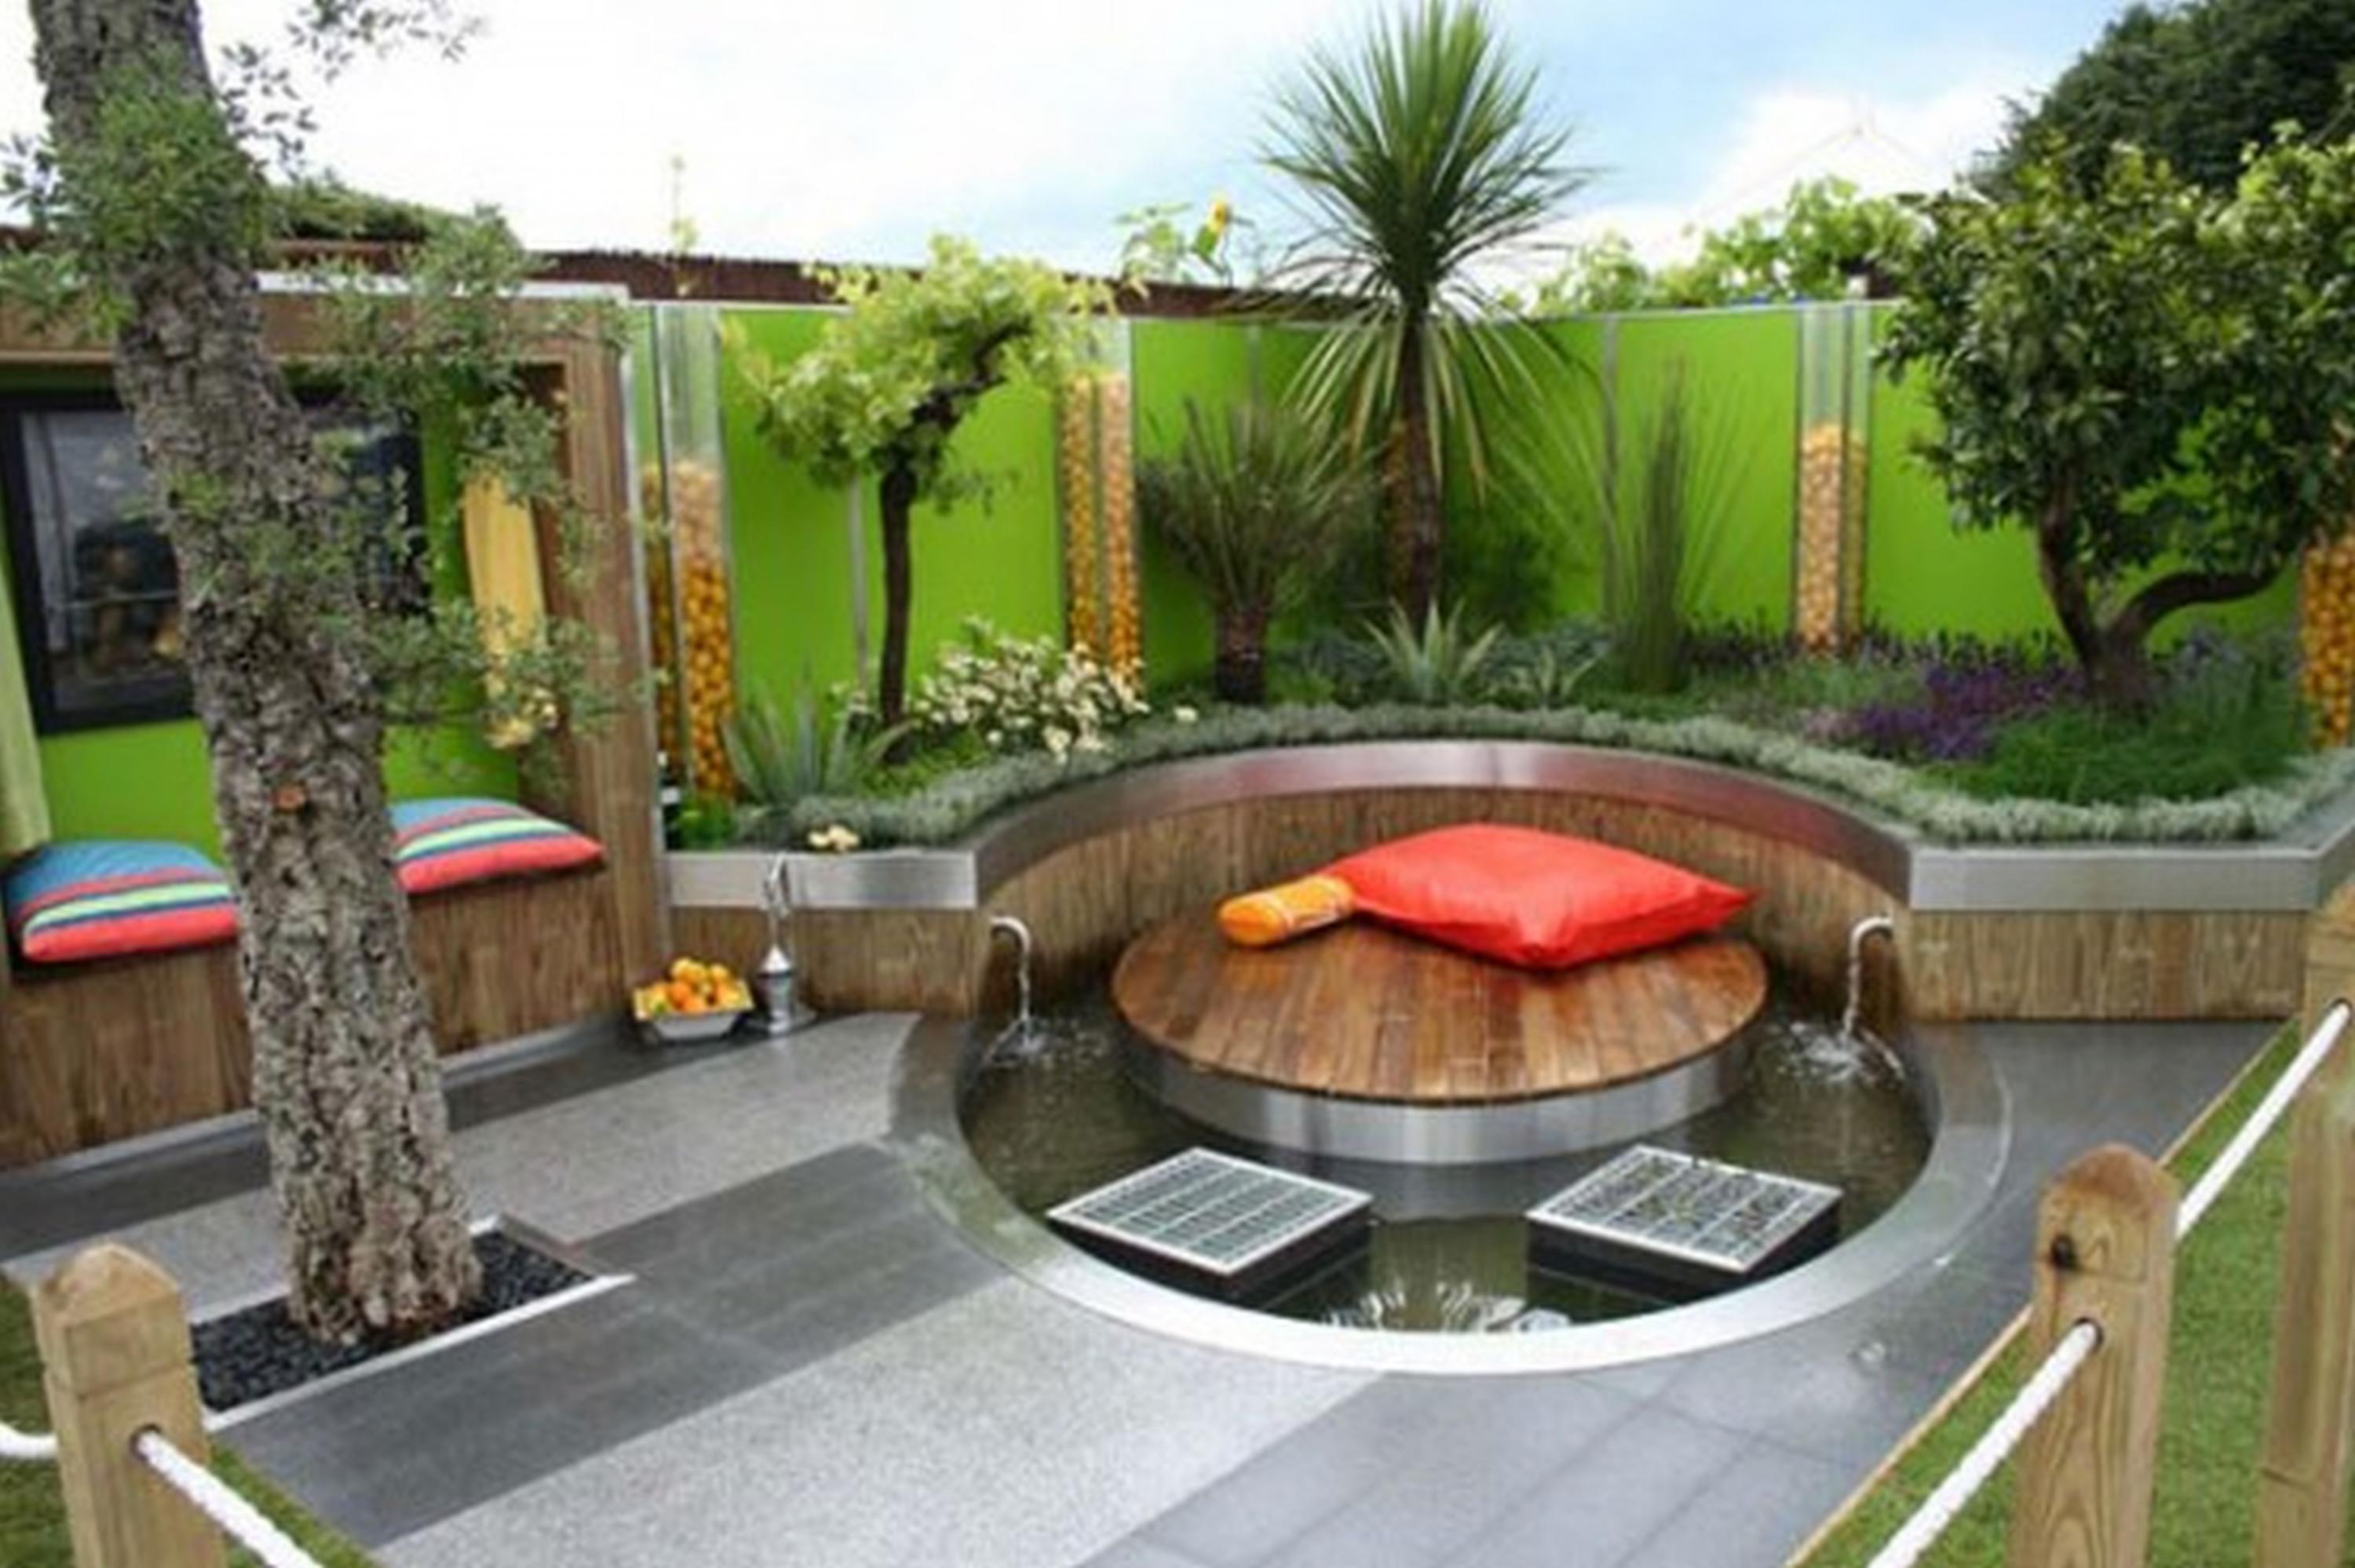 Awesome Gallery Of Interesting Small Backyard Ideas - Interior Design Inspirations